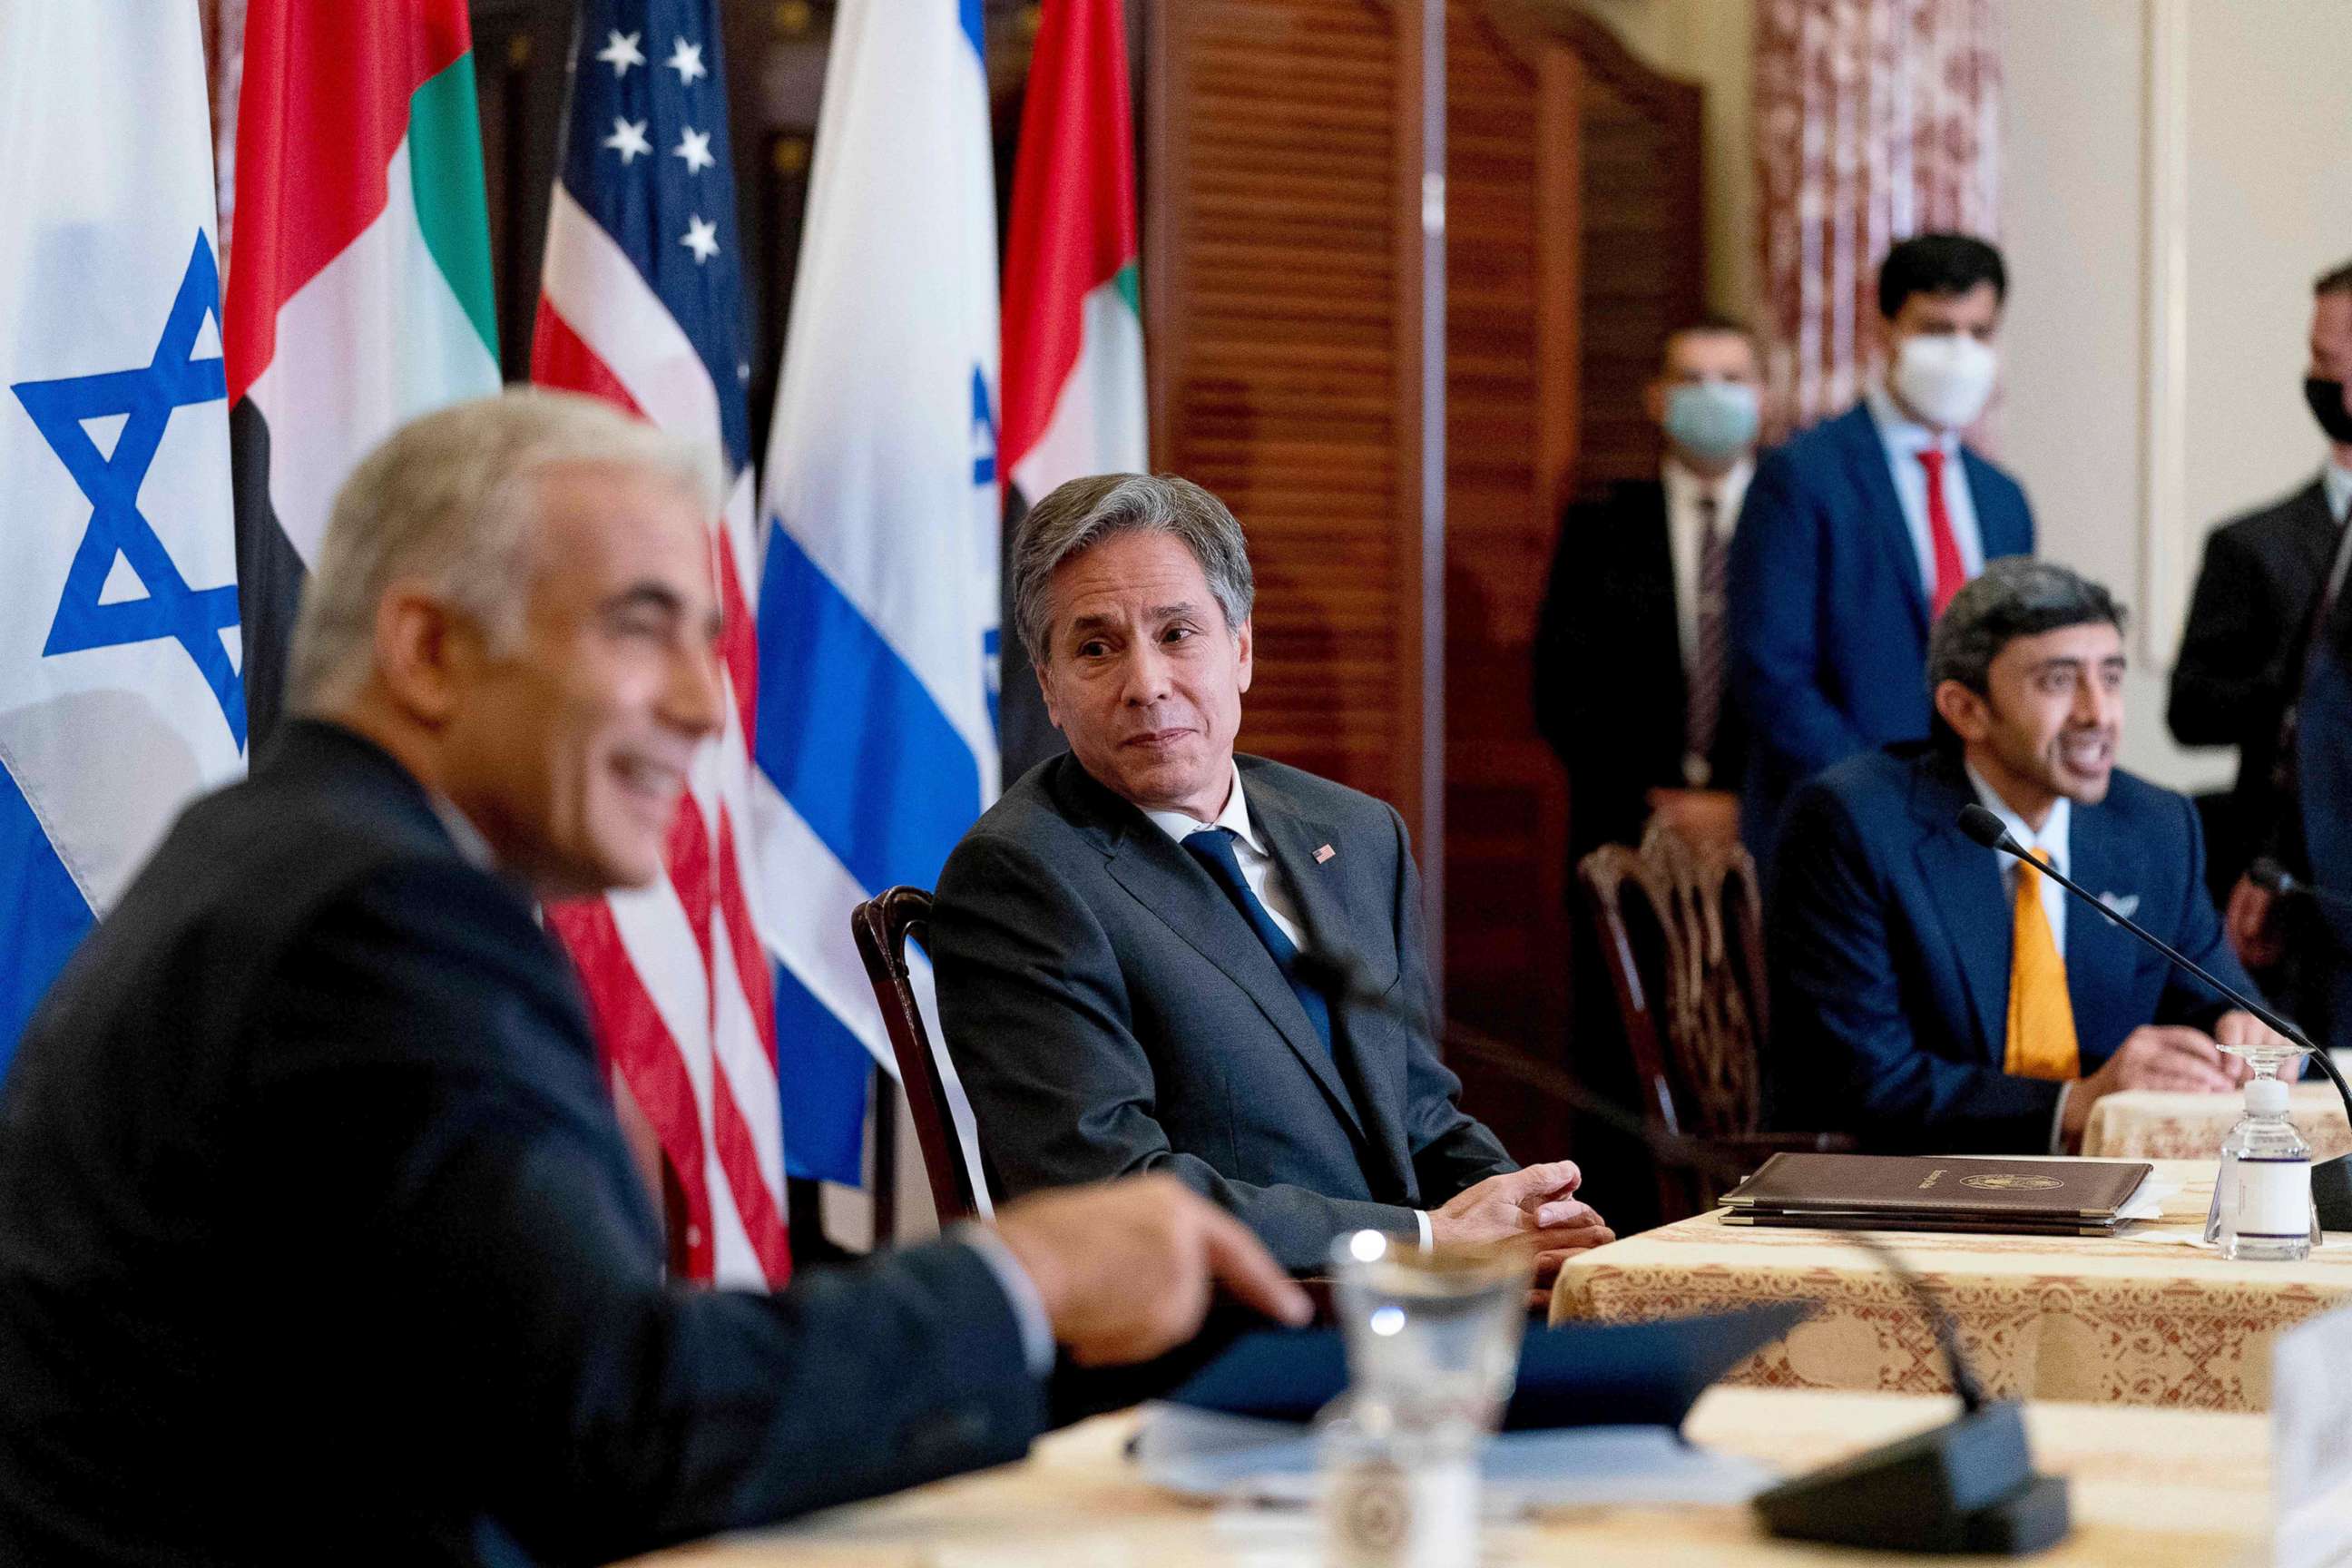 PHOTO: Israeli Foreign Minister Yair Lapid, US Secretary of State Antony Blinken and United Arab Emirates Foreign Minister Sheikh Abdullah bin Zayed al-Nahyan take part in a joint news conference at the State Department in Washington, Oct, 13, 2021.